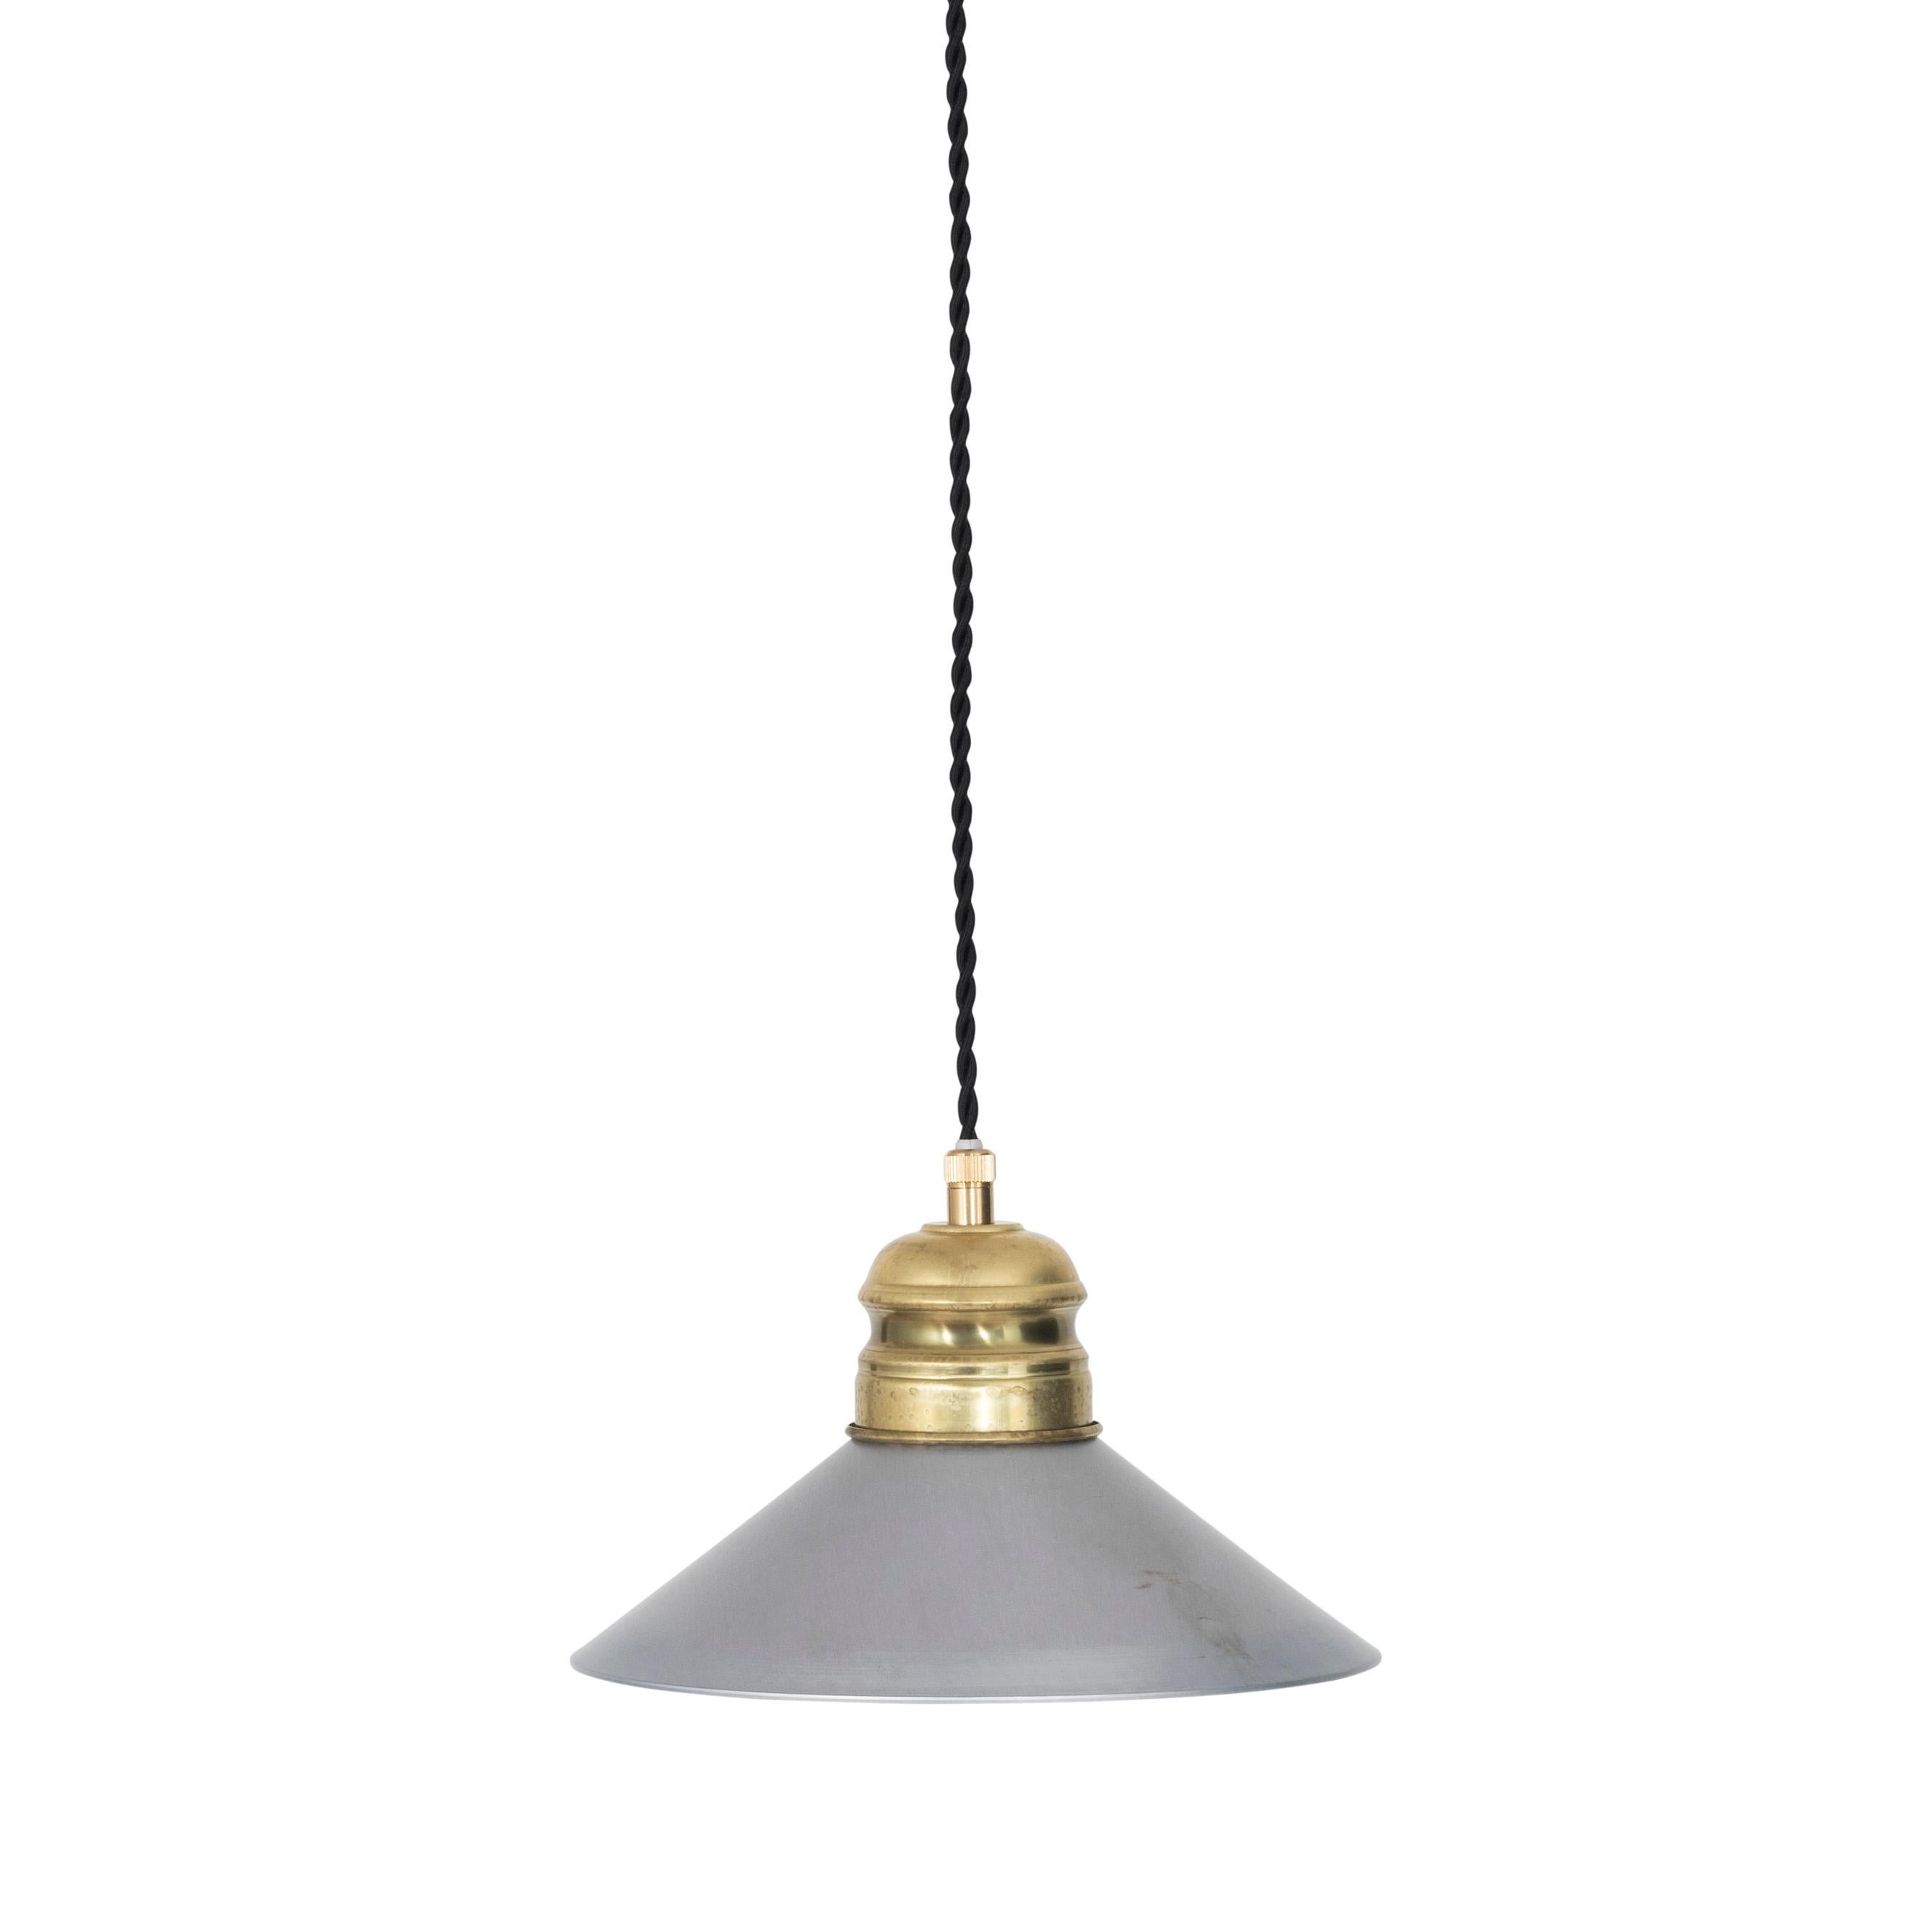 Rustik
Cord 1.5 m
Max 40 W E27
0054-5 shade raw alu
Measure: D. 200 mm

The lamps are wiring with standard Europe wiring.

The traditional shoemaker's lamp in Konsthantverk's own vintage. A classic in the kitchen with a timeless design. Shade and